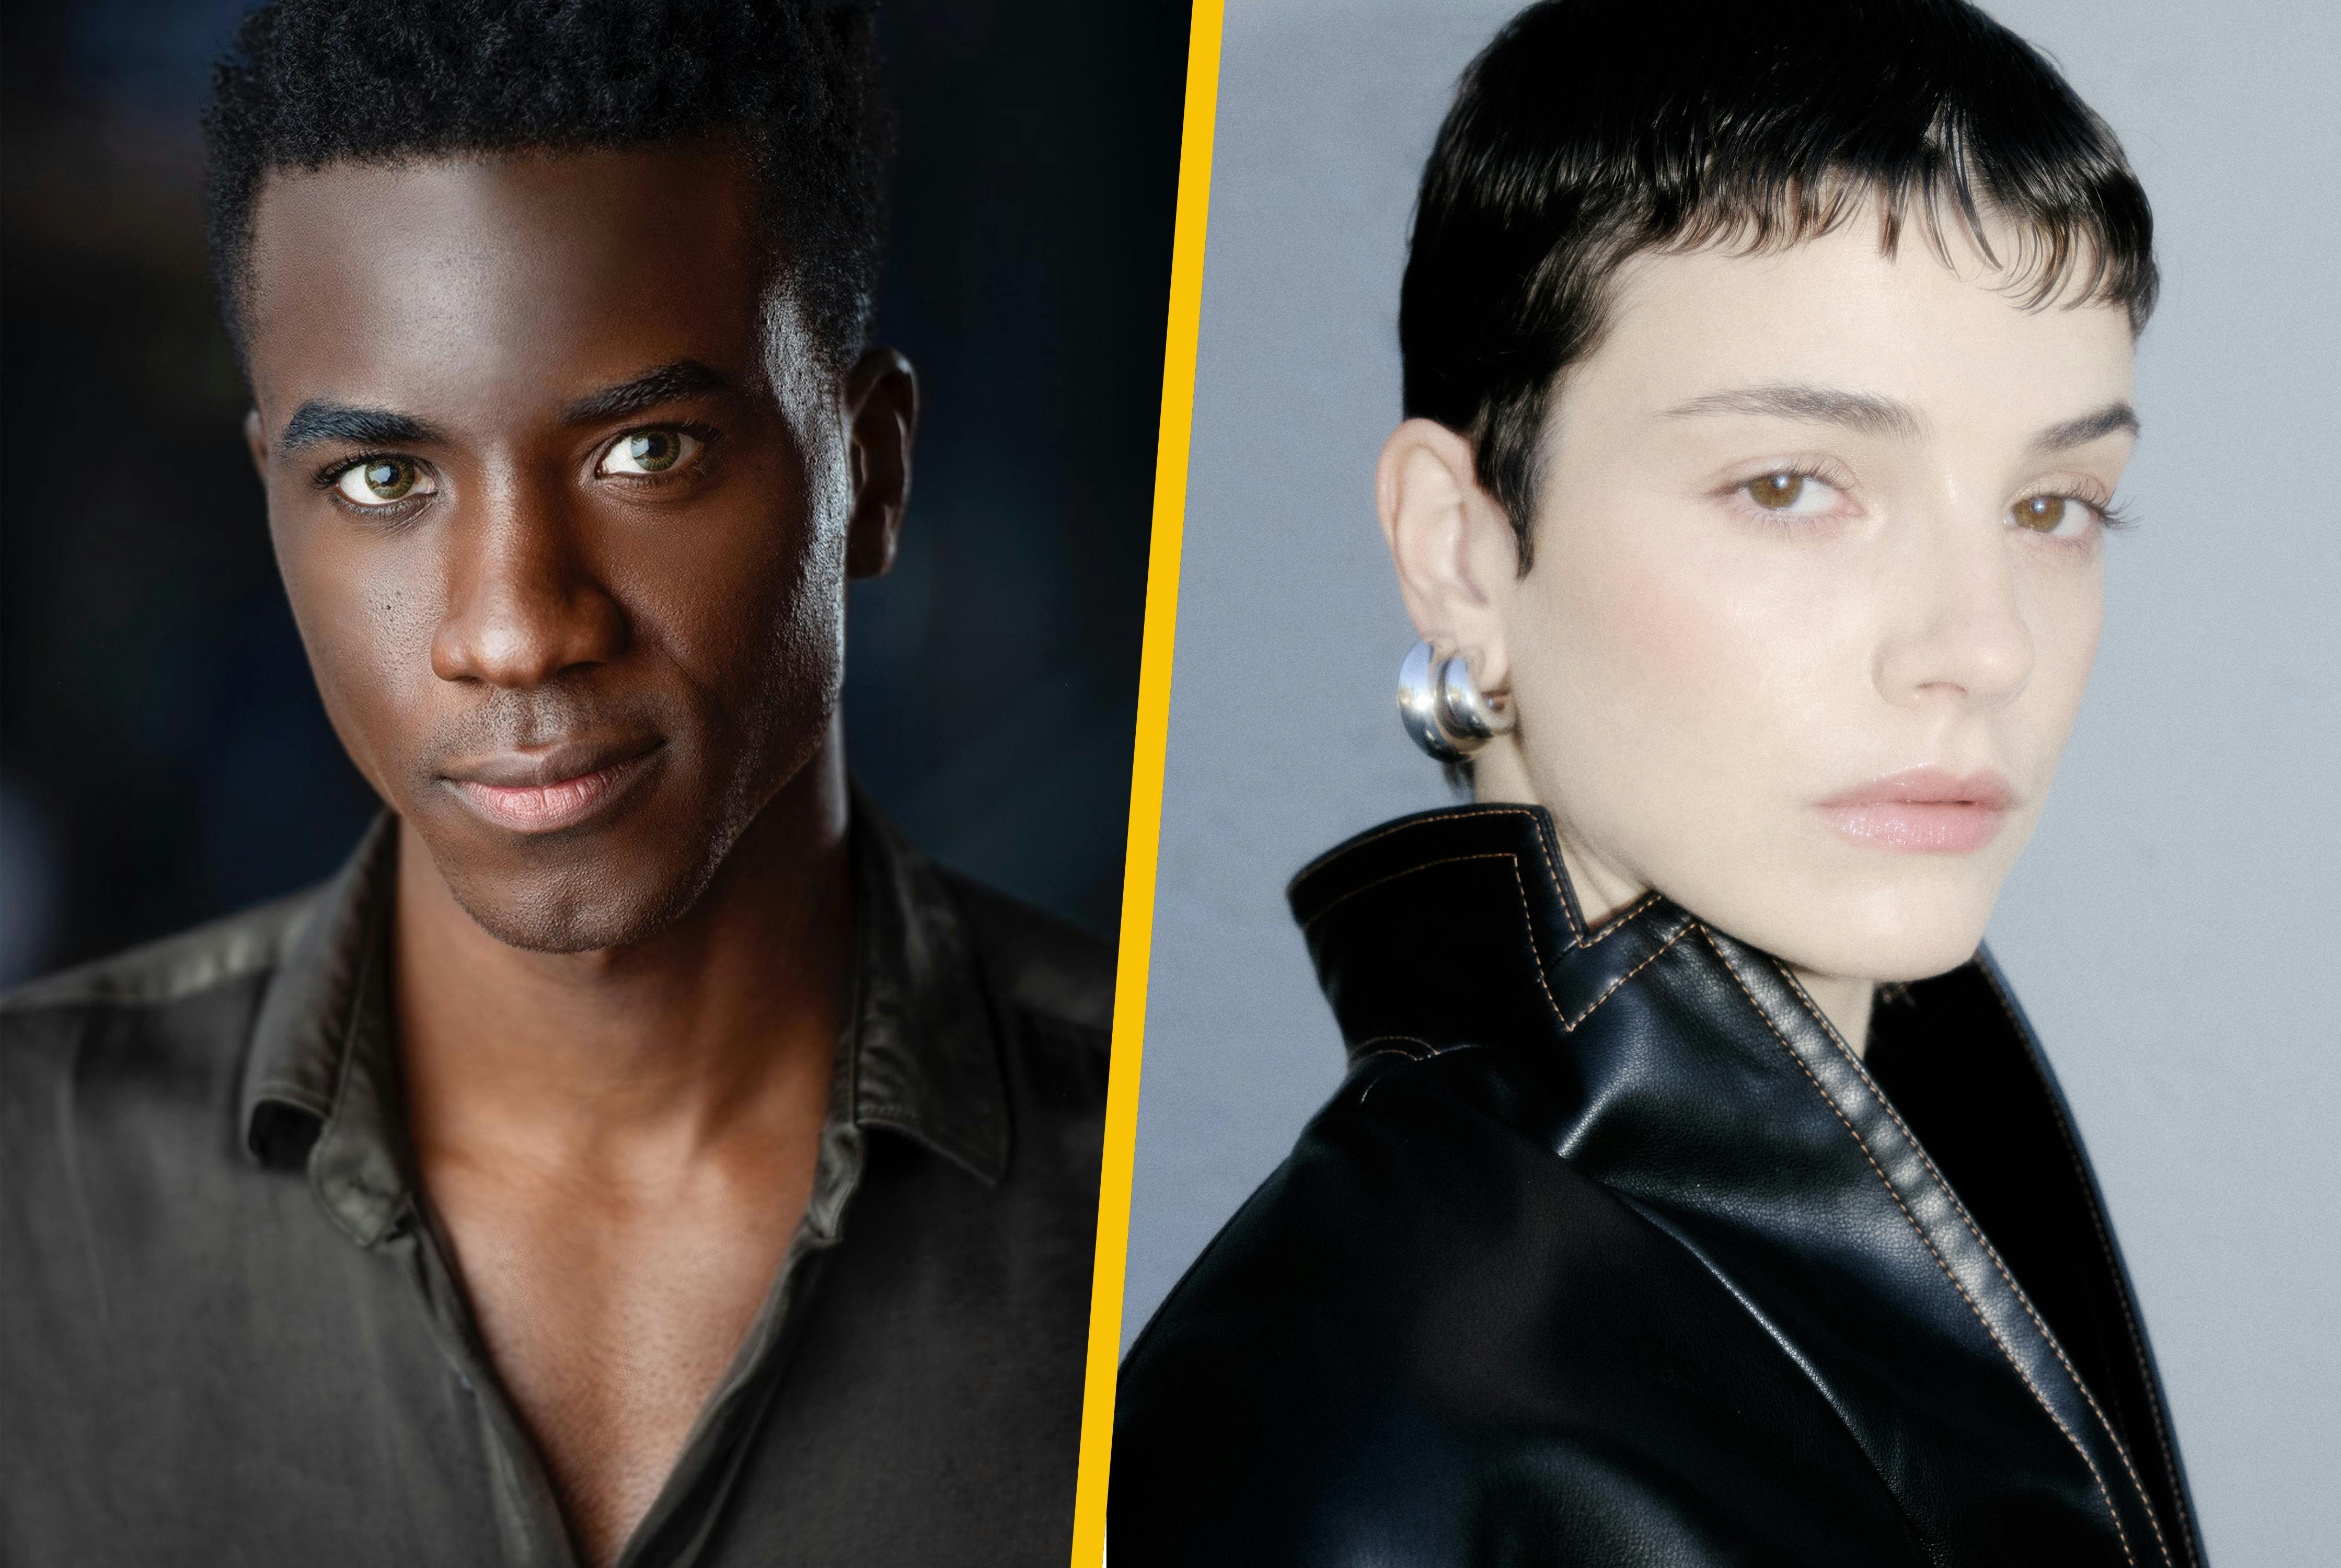 Side-by-side headshots for Karim Diané and Zoë Steiner